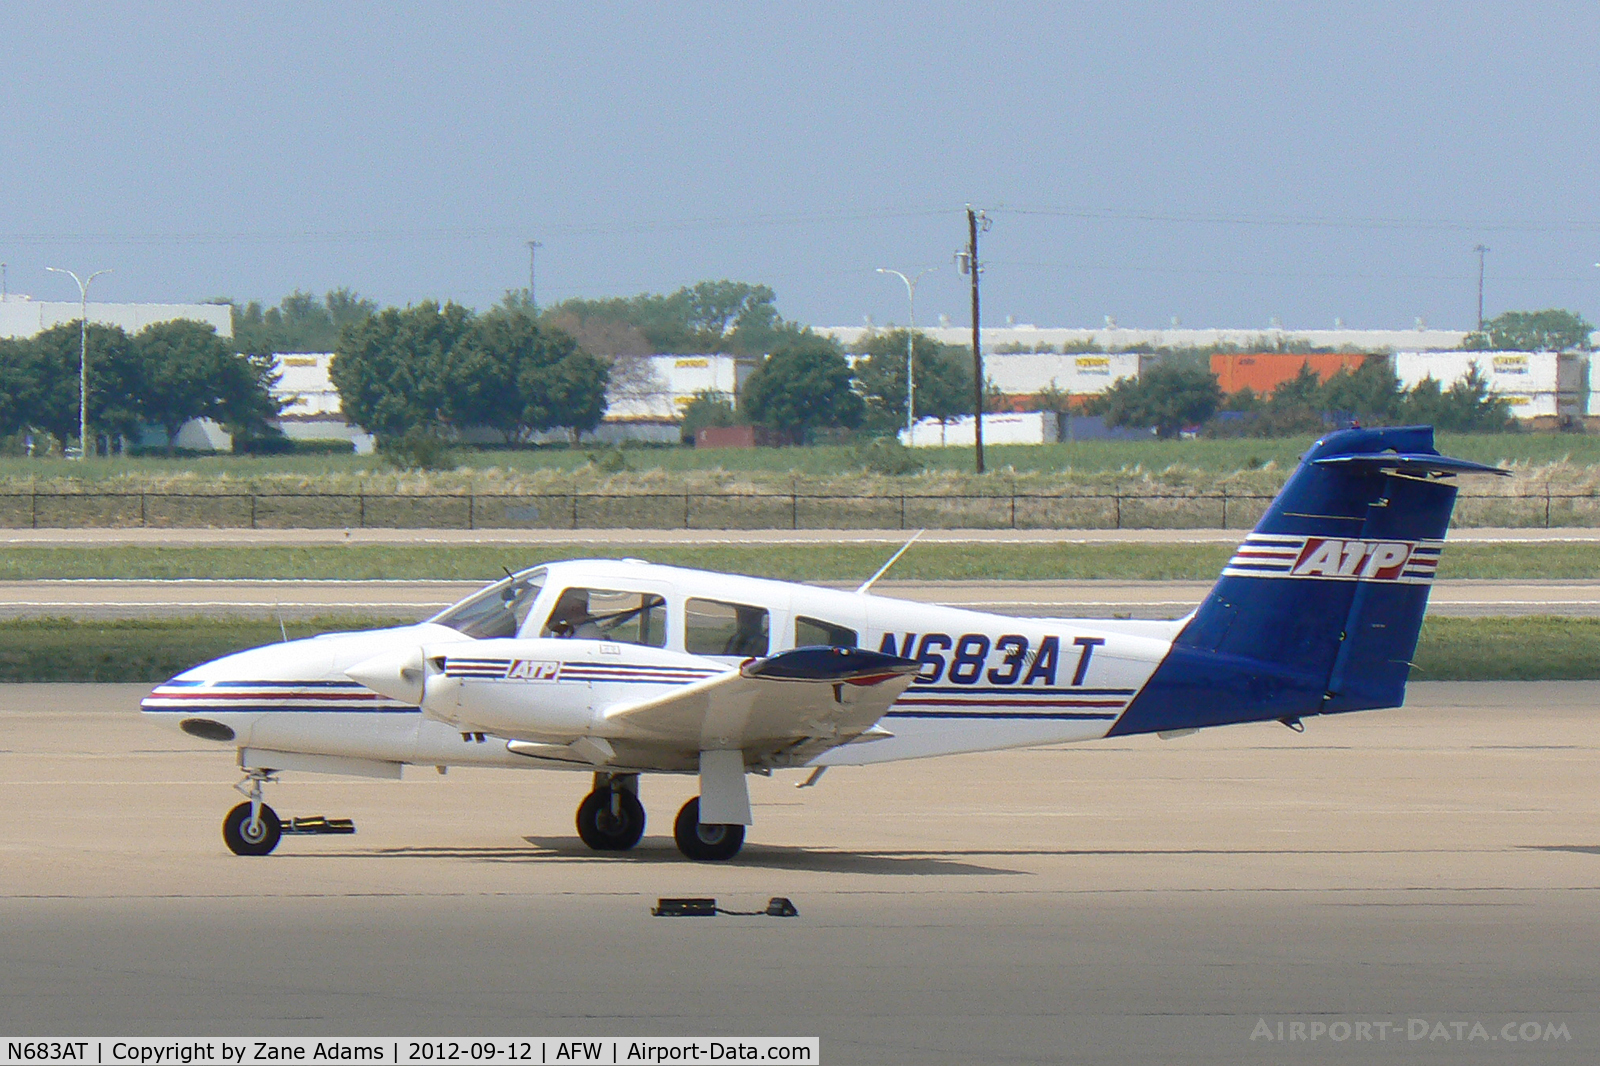 N683AT, 2010 Piper PA-44-180 Seminole C/N 4496286, At Alliance Airport - Fort Worth, TX